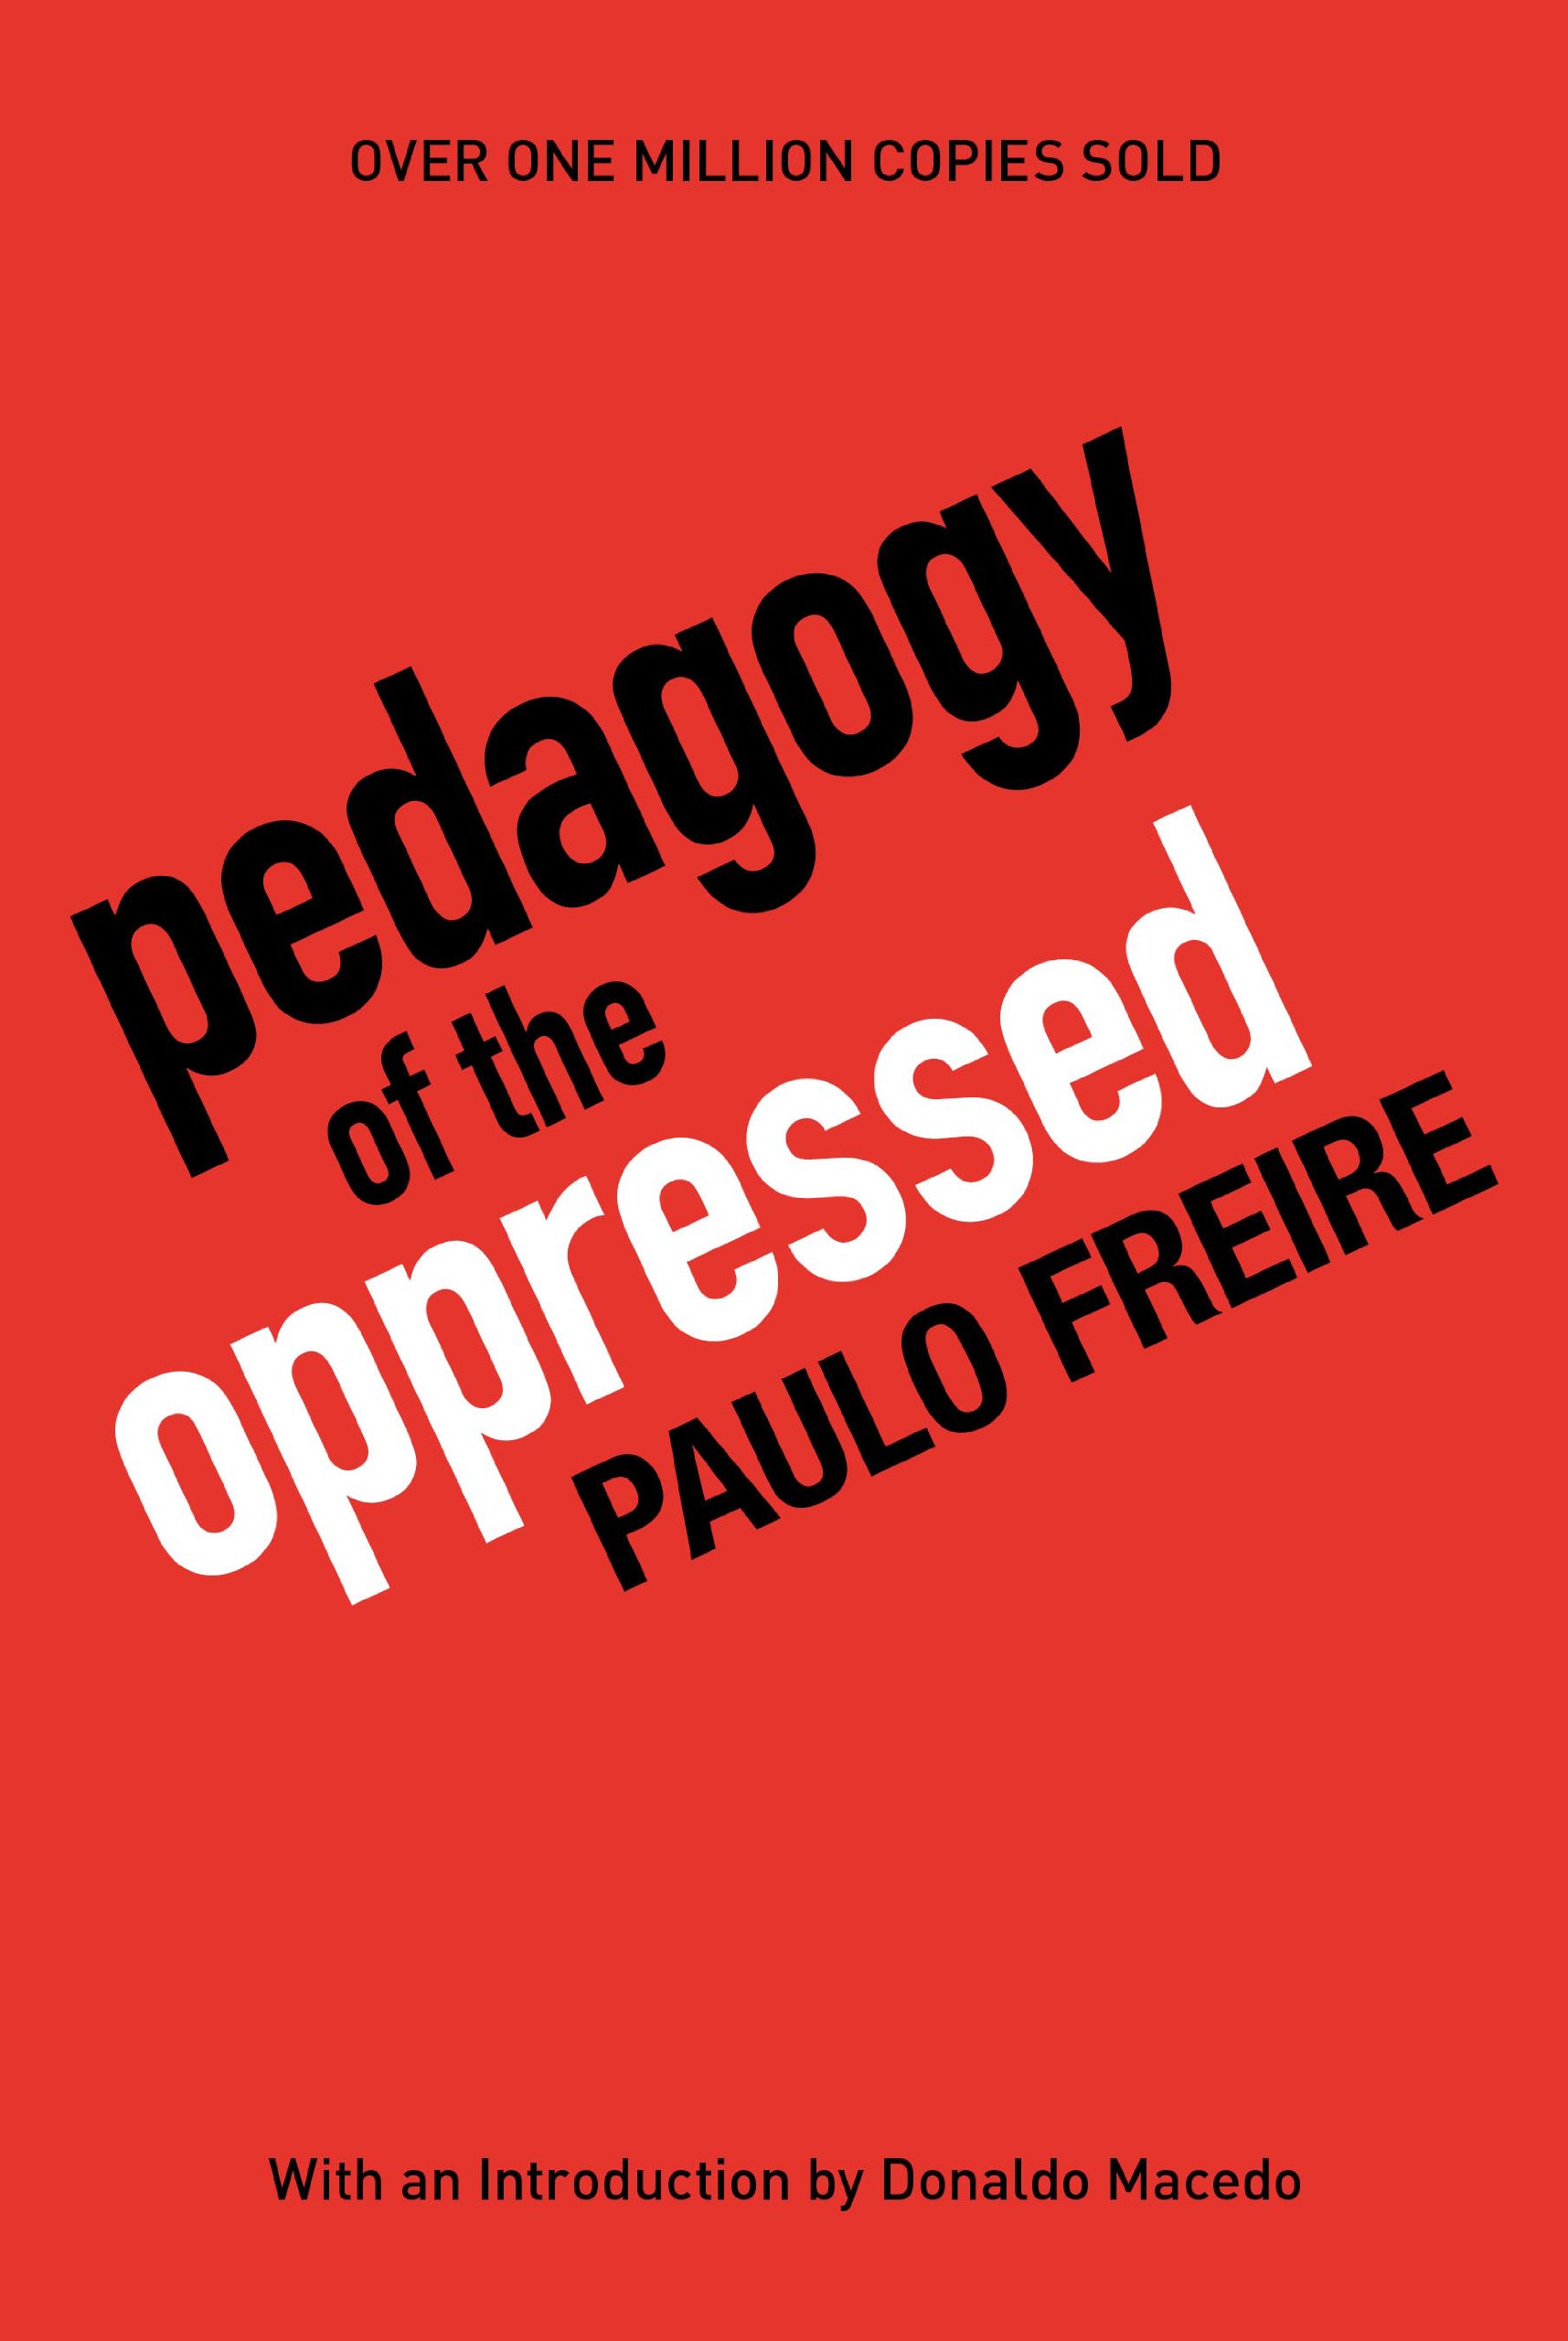 Cover Photo of the book Pedagogy of the Oppressed - Paulo Freire